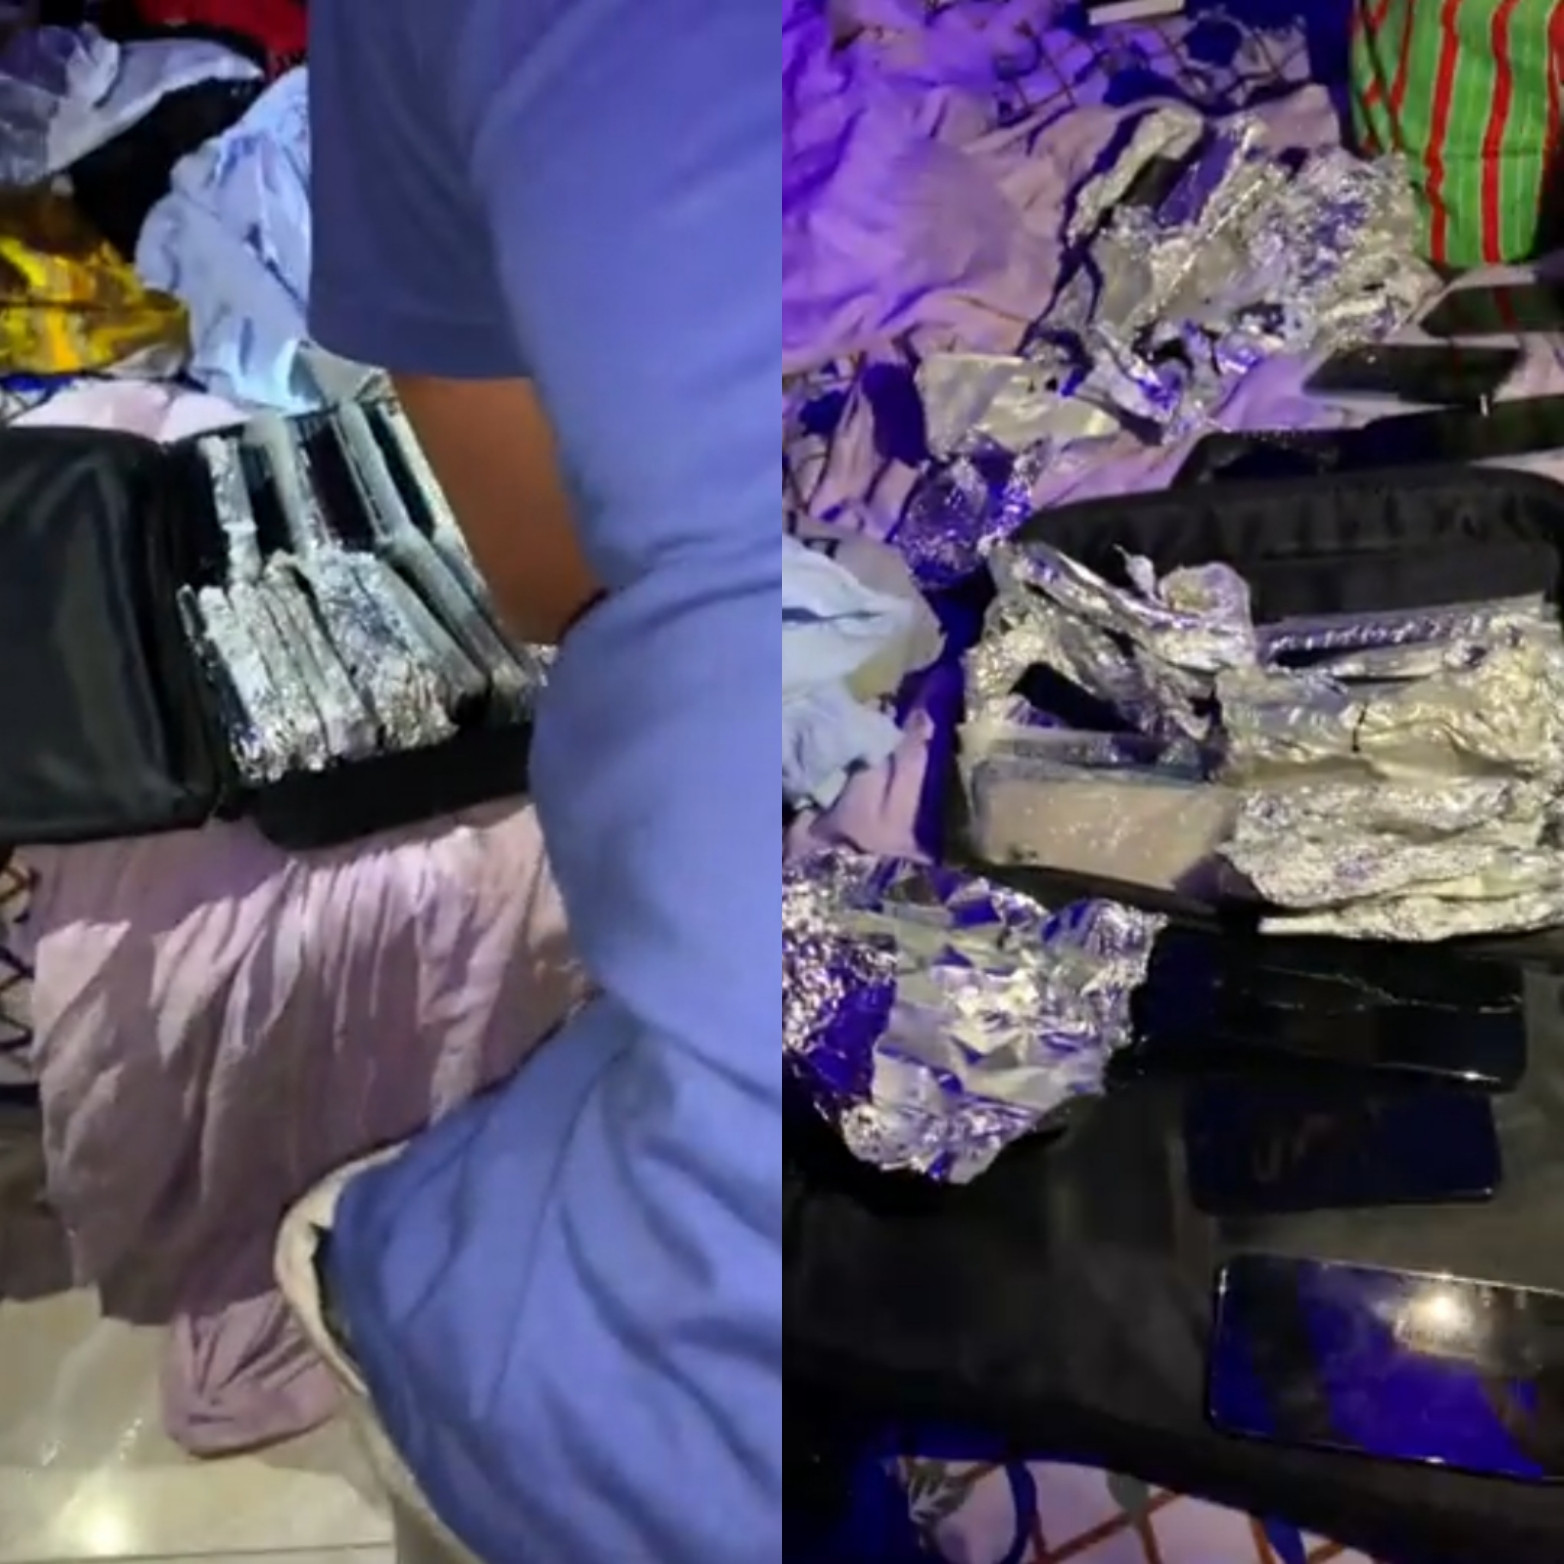 Telephone vendor absonds after ‘over 400 telephones’ stolen at Afrochella in Ghana have been traced to him (video)